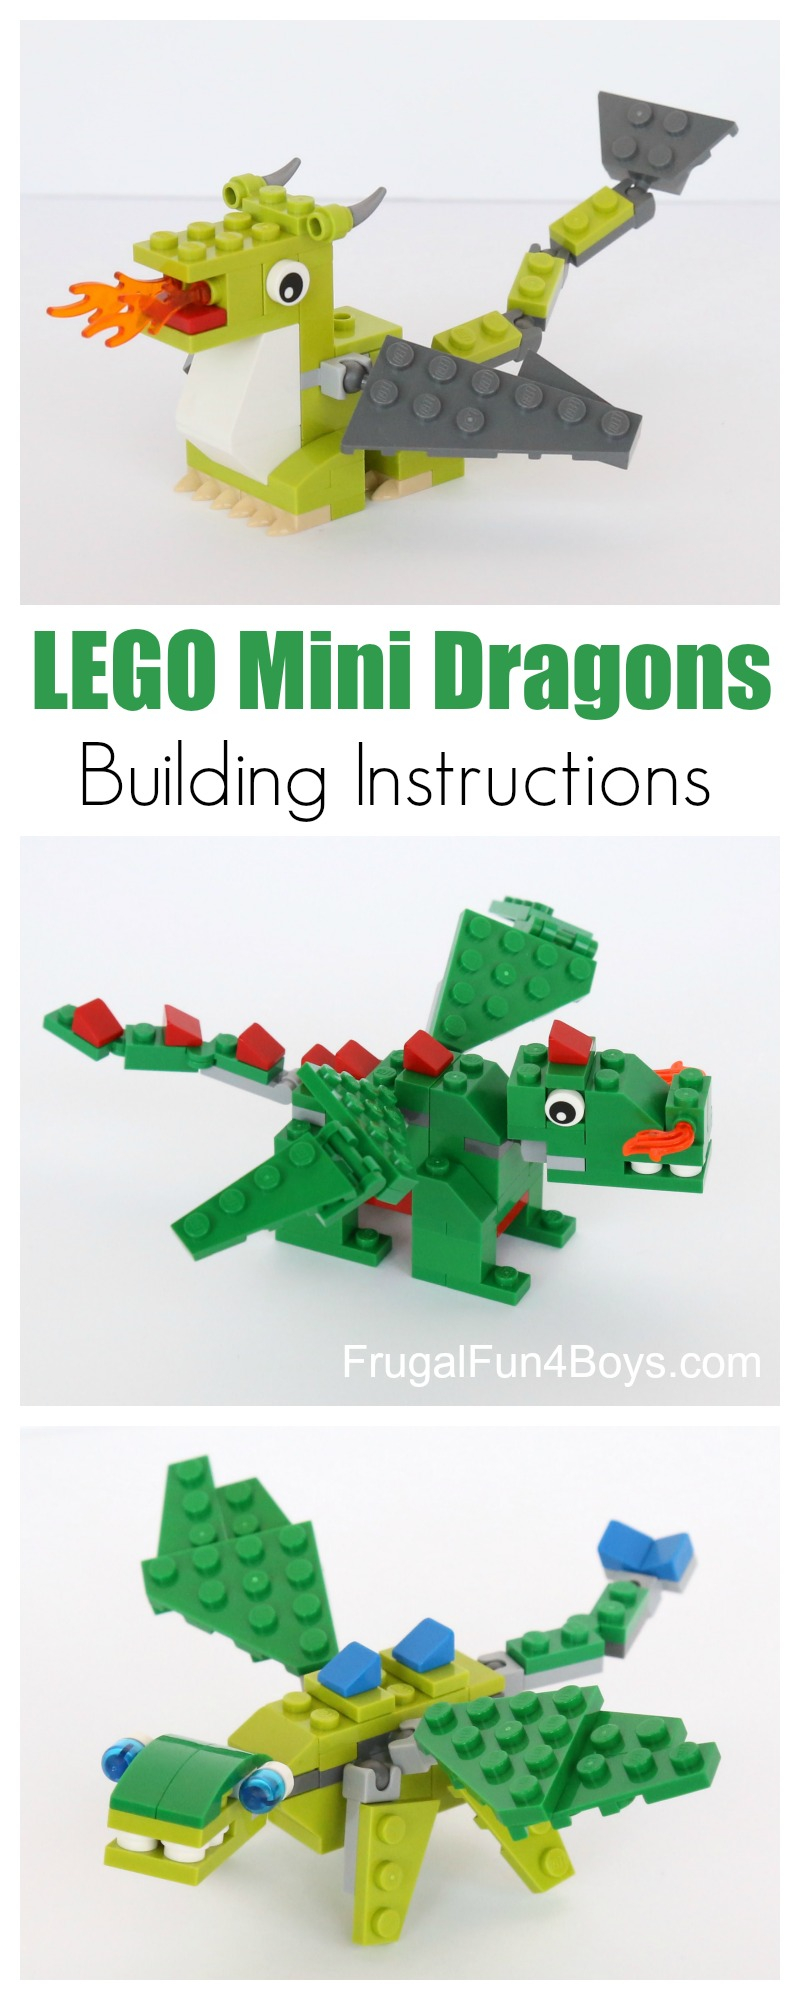 Origami Instructions For A Dragon Lego Mini Dragon Building Instructions Frugal Fun For Boys And Girls